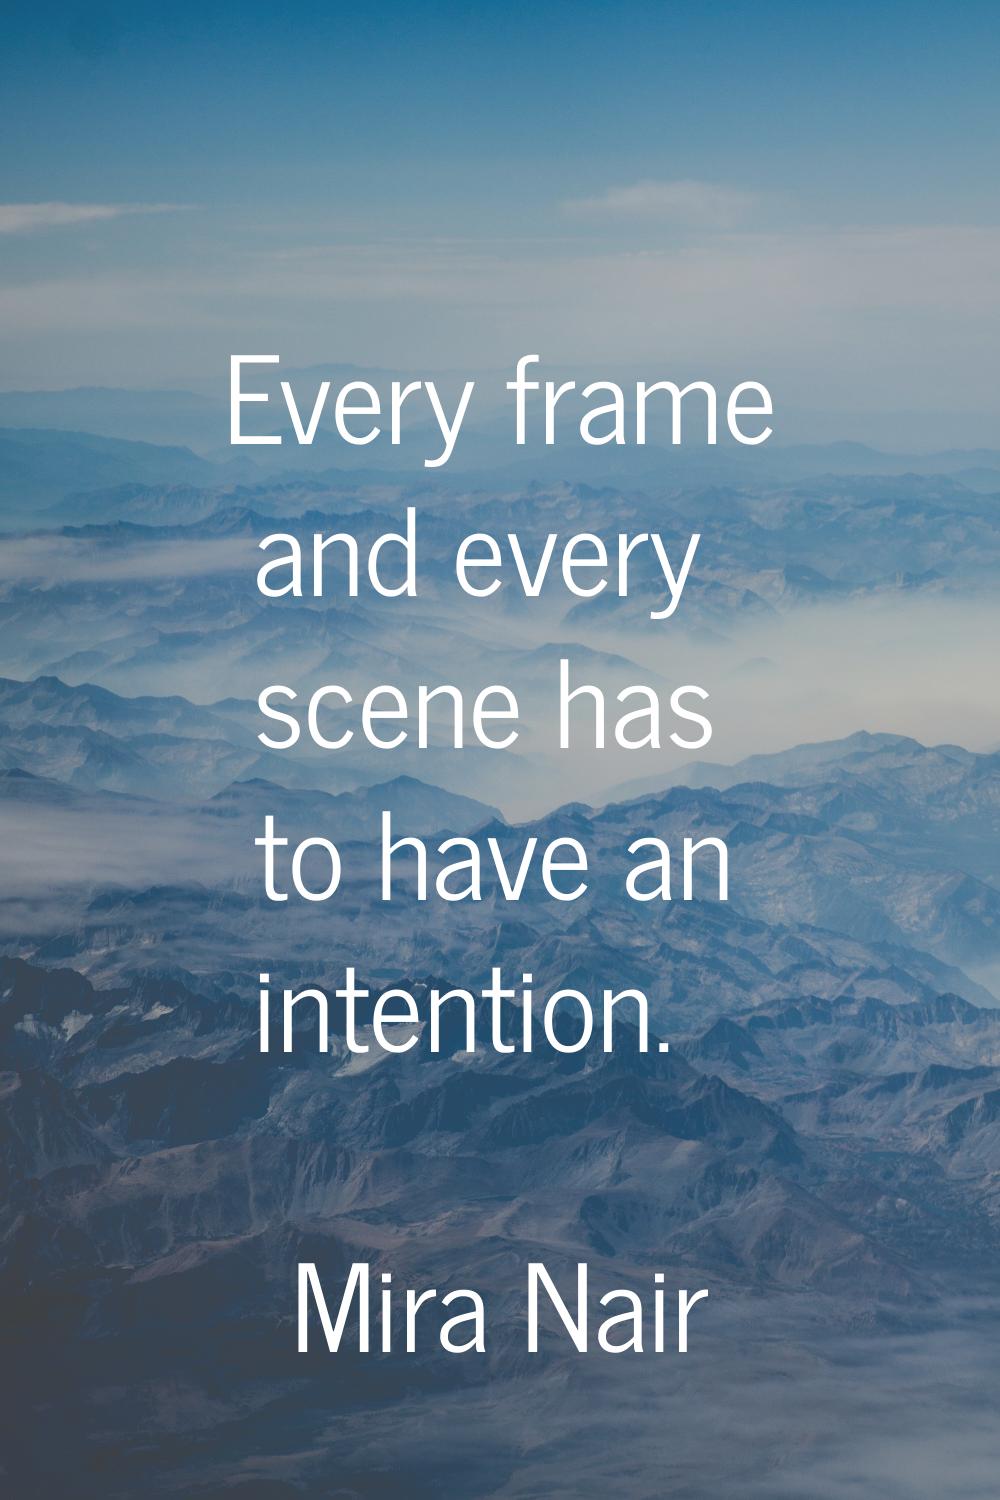 Every frame and every scene has to have an intention.